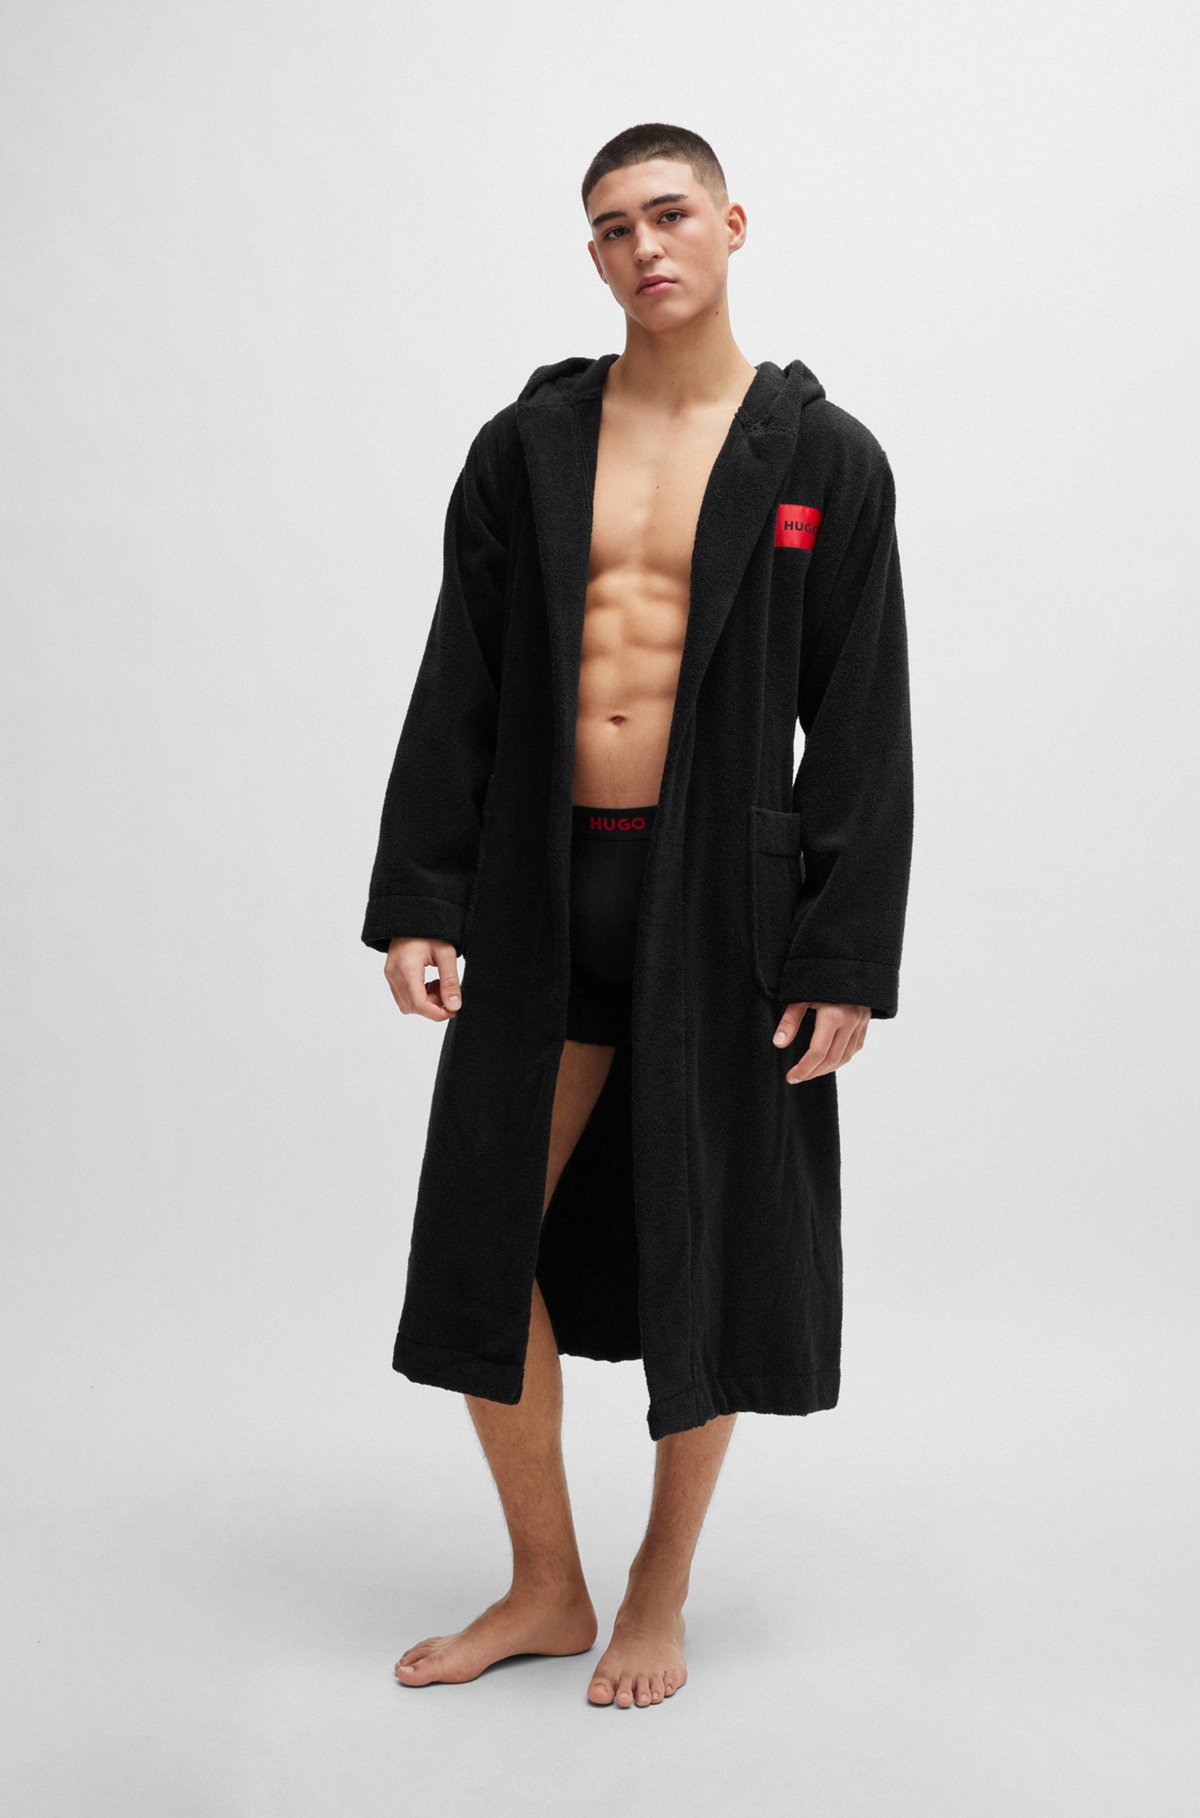 HUGO - Cotton-terry hooded dressing gown with red logo label